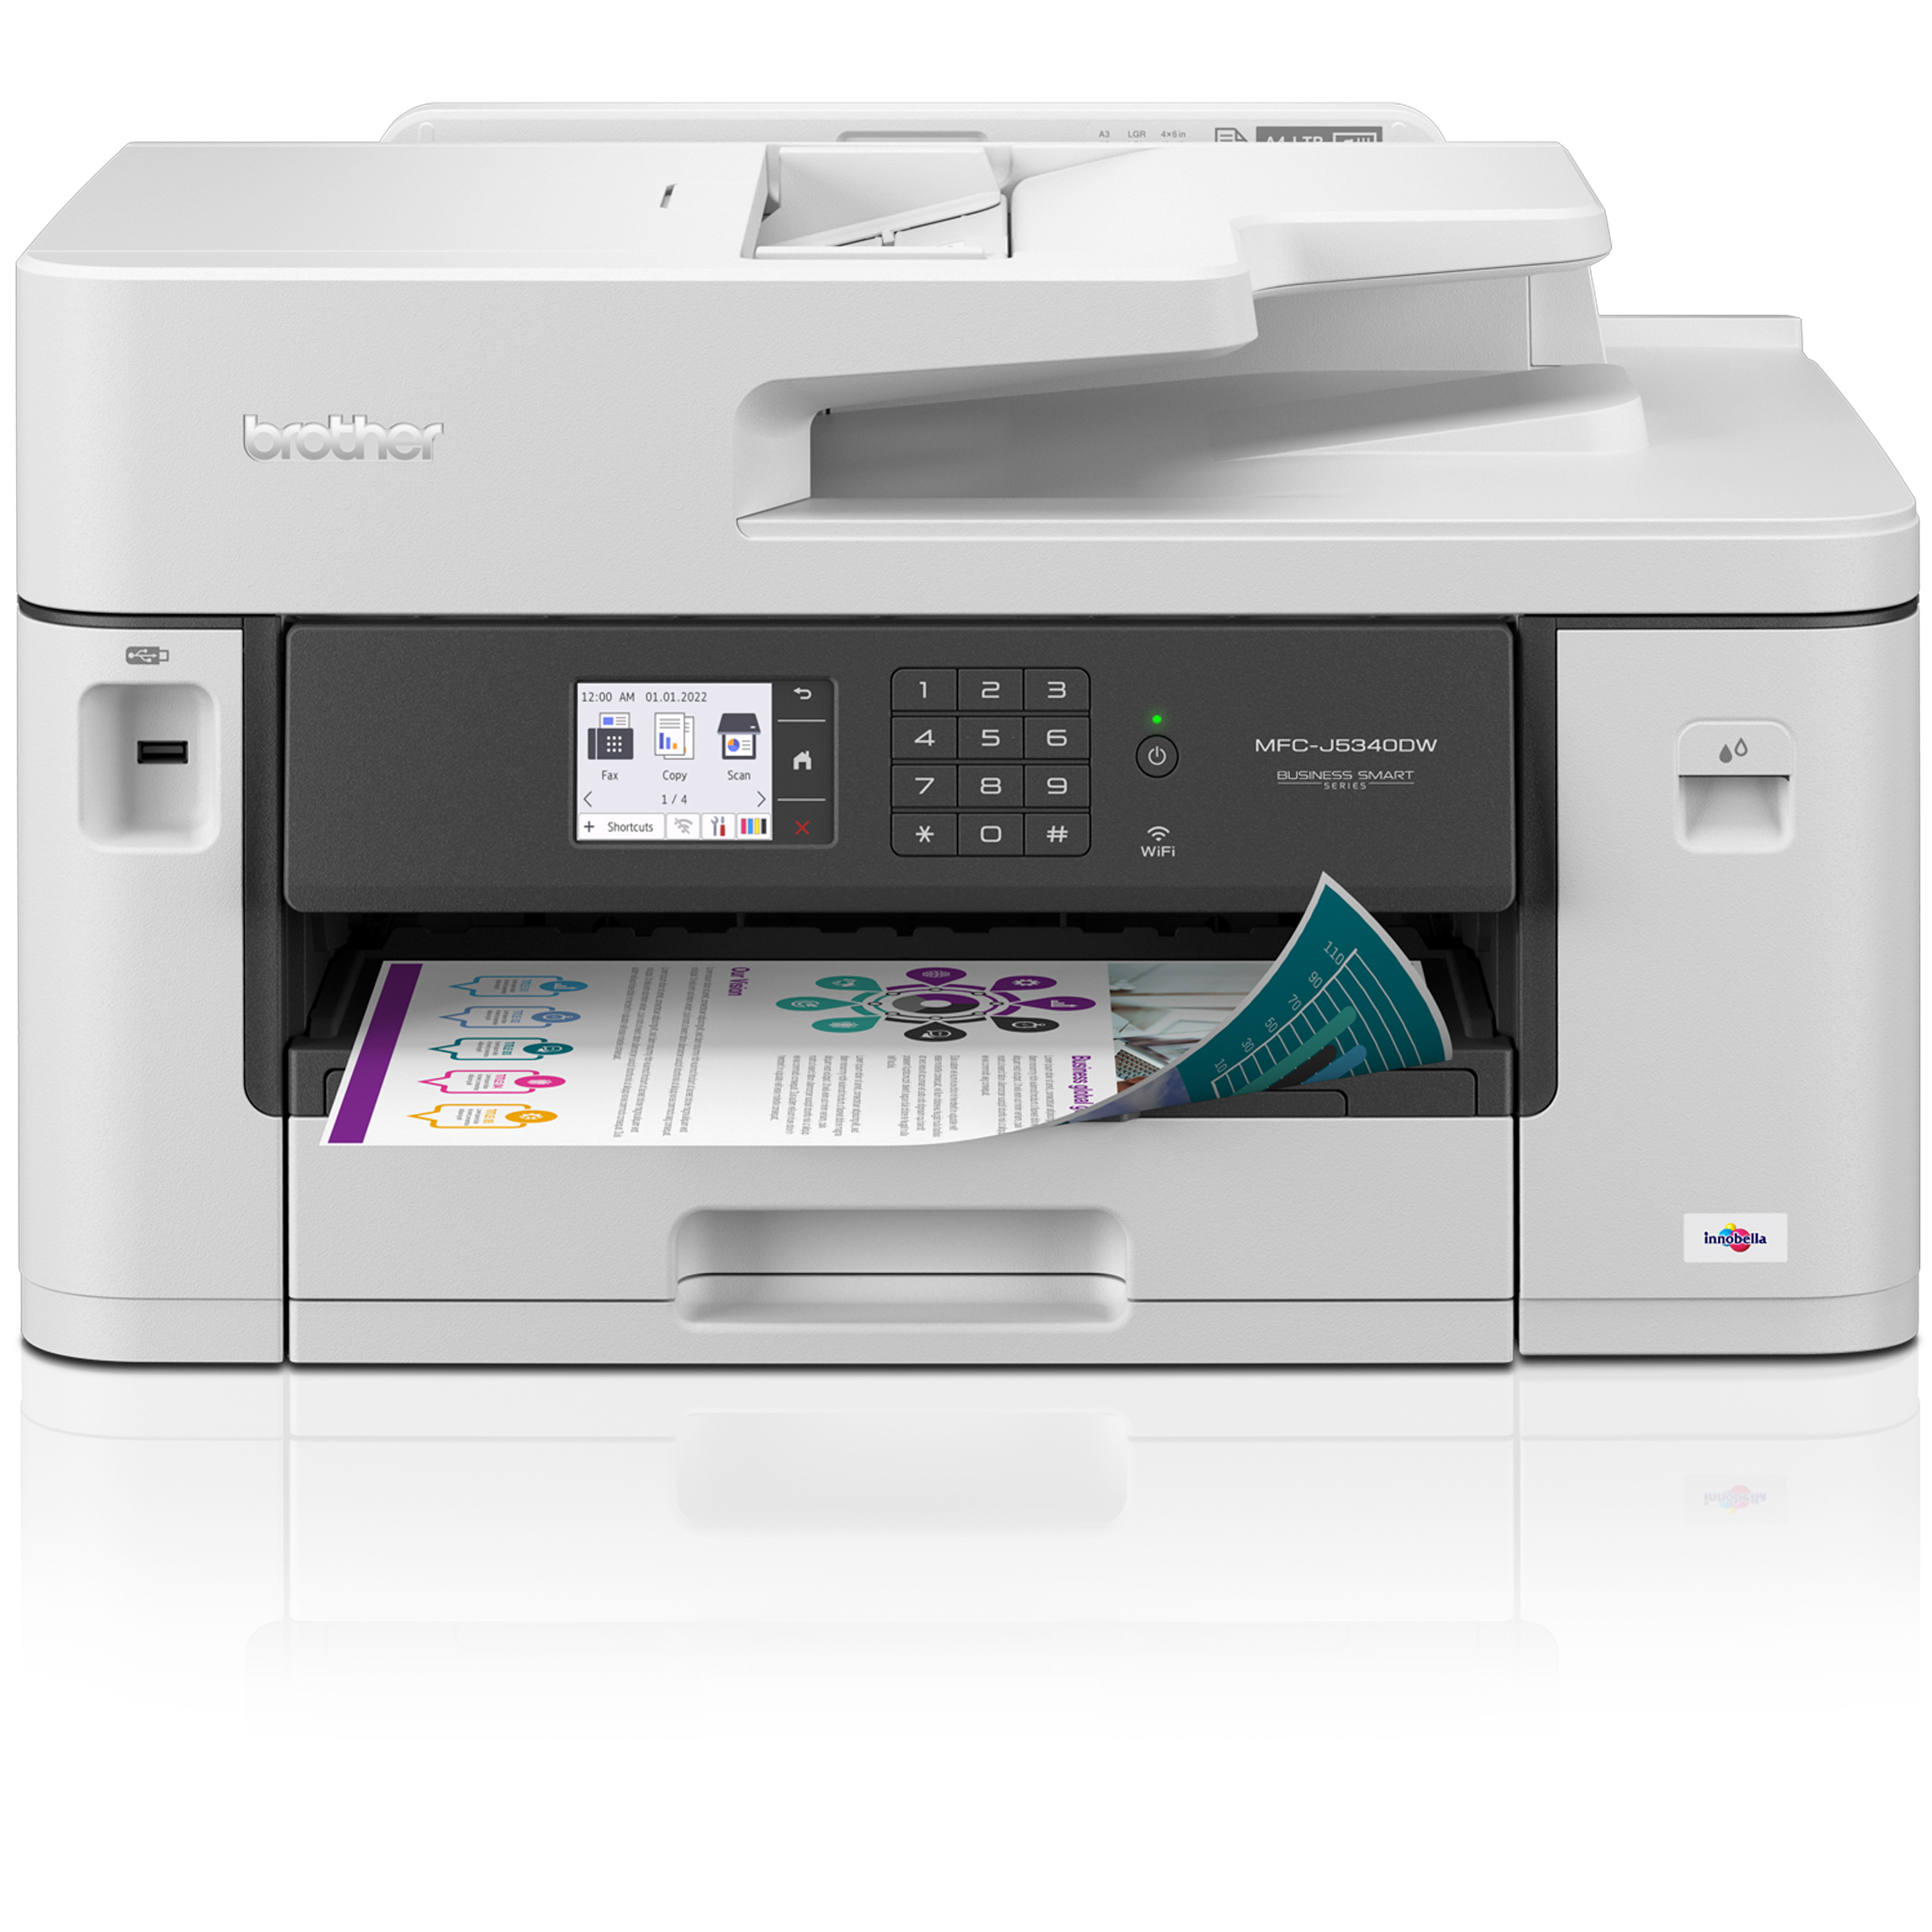 

Brother MFC-J5340DW Business Color Inkjet All-in-One Printer with printing up to 11"x17" (Ledger) size capabilities with 4 Months Free Ink